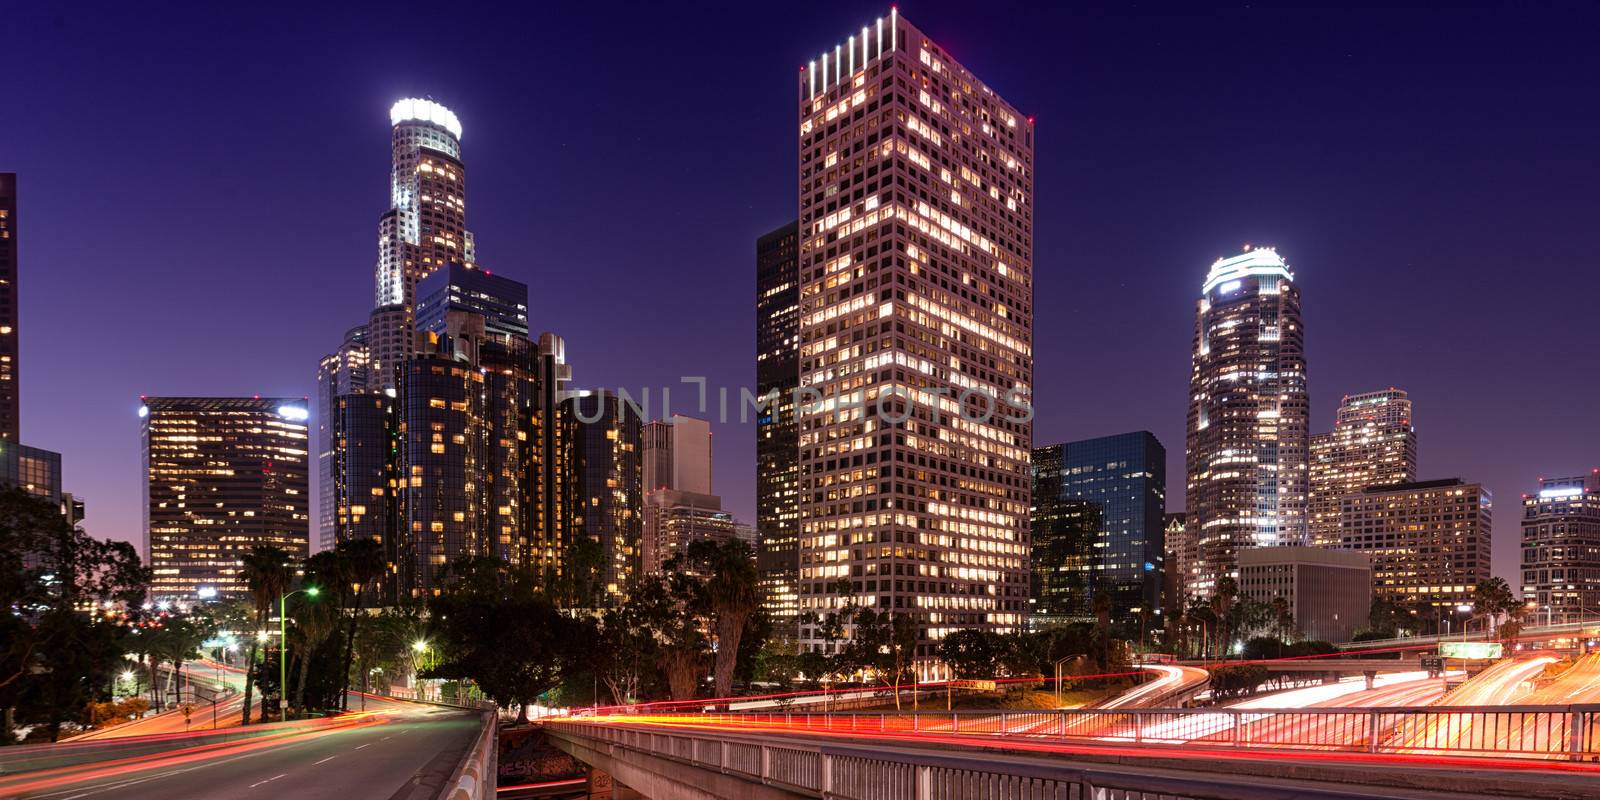 Downtown skylines lit up at night, Los Angeles, California, USA